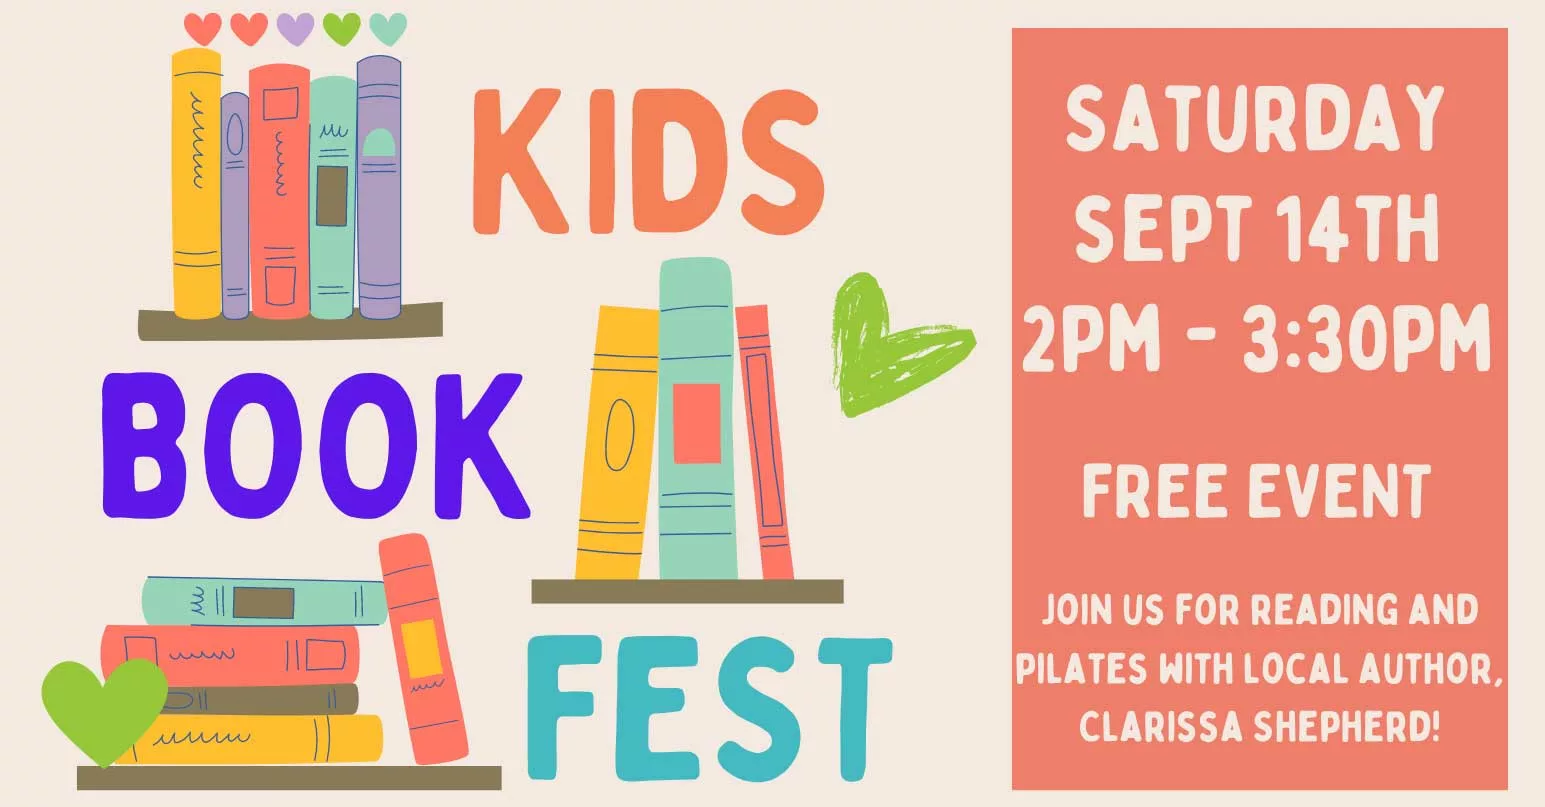 September Kids Book Fest . Saturday September 14th 2pm-3:30pm. Join us for reading and pilates with local author Clarissa Shepherd